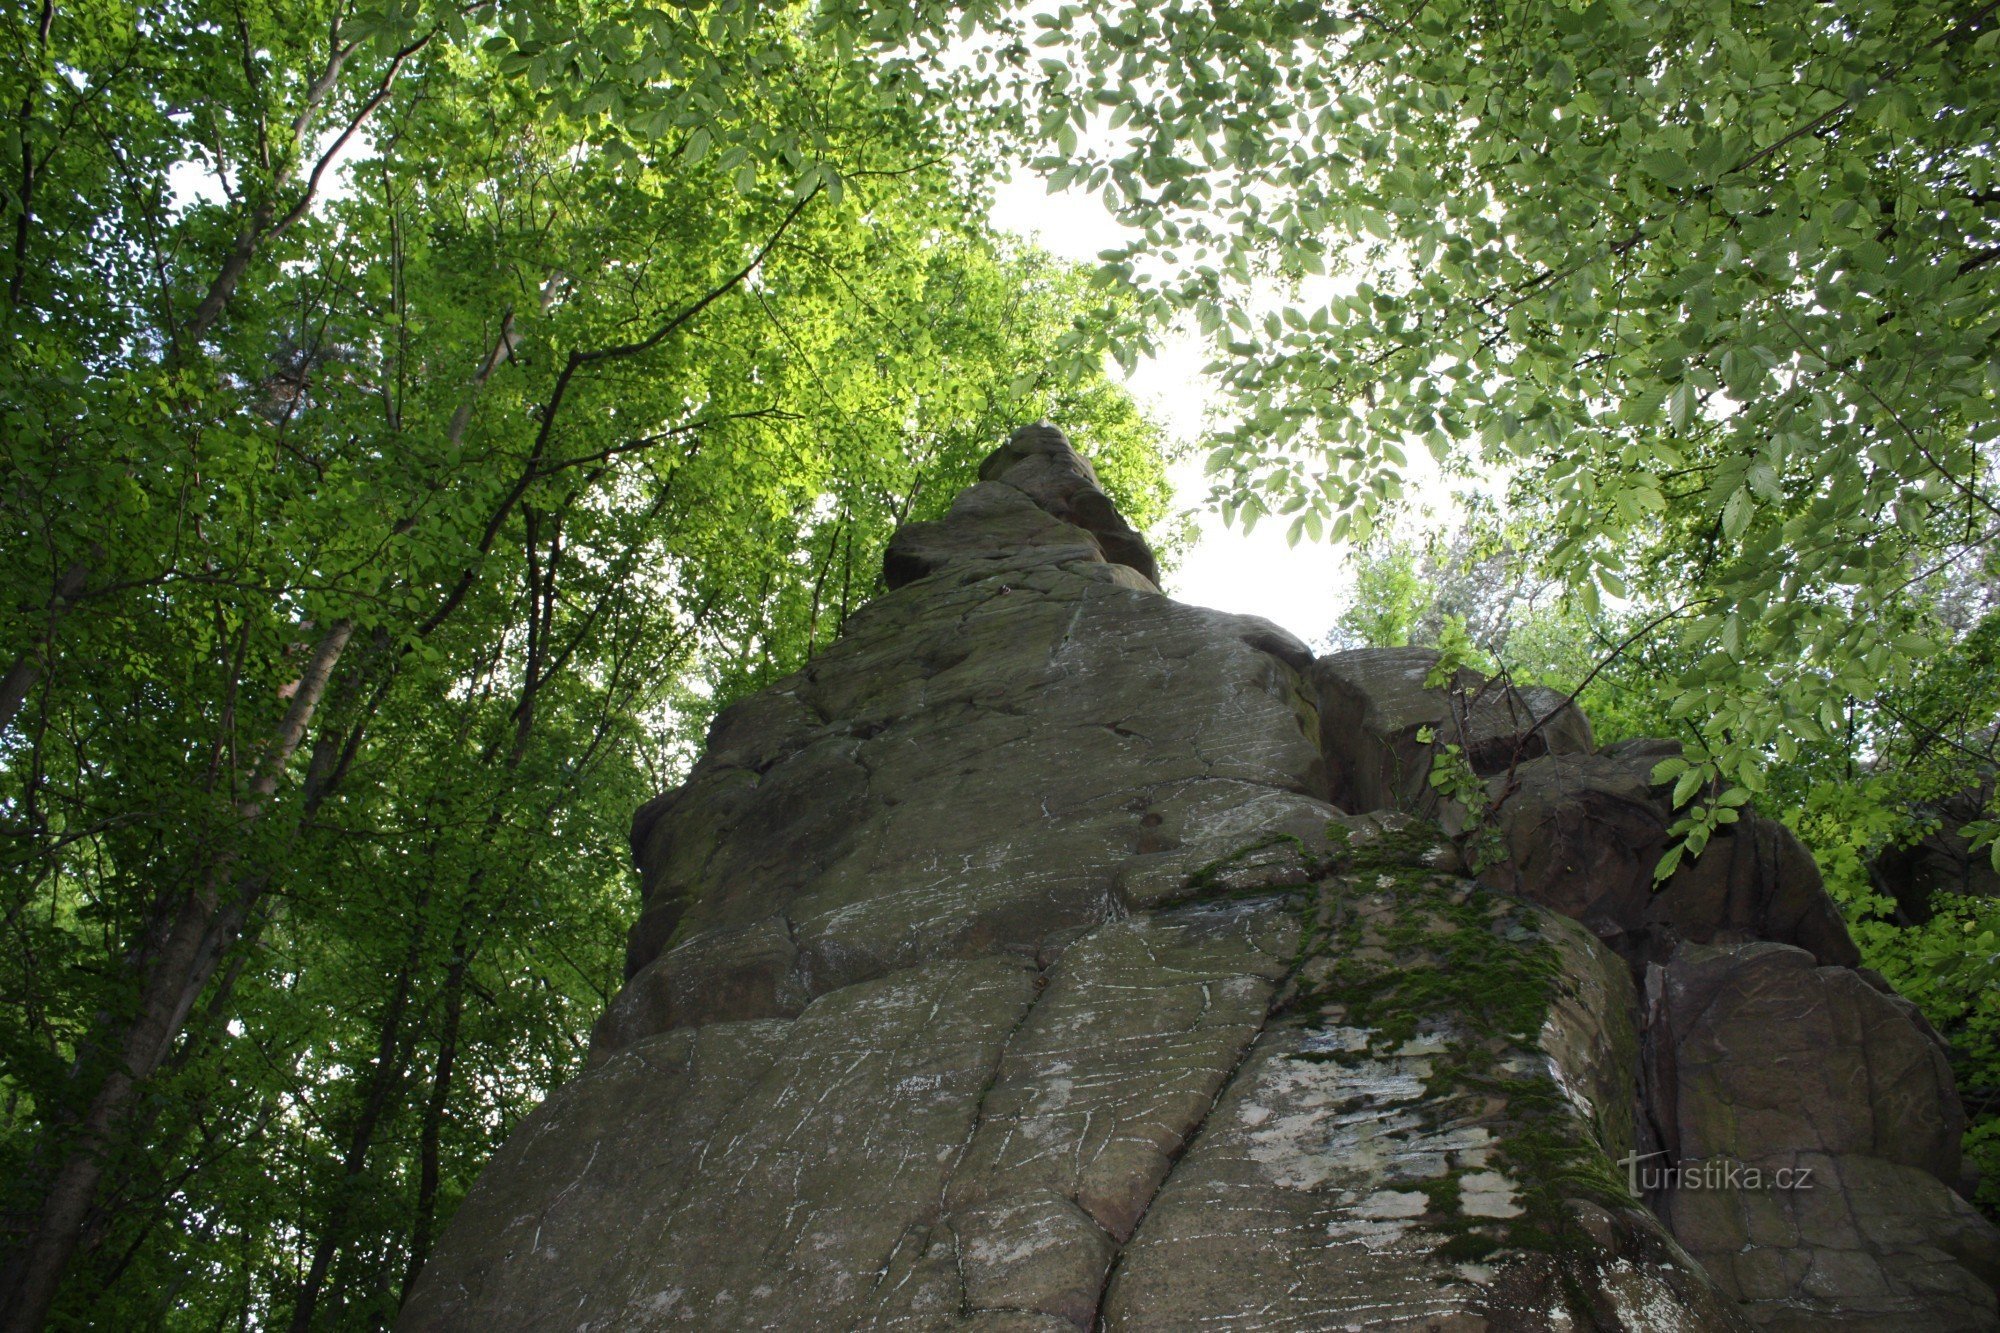 One of the walls of the Giant's Foot